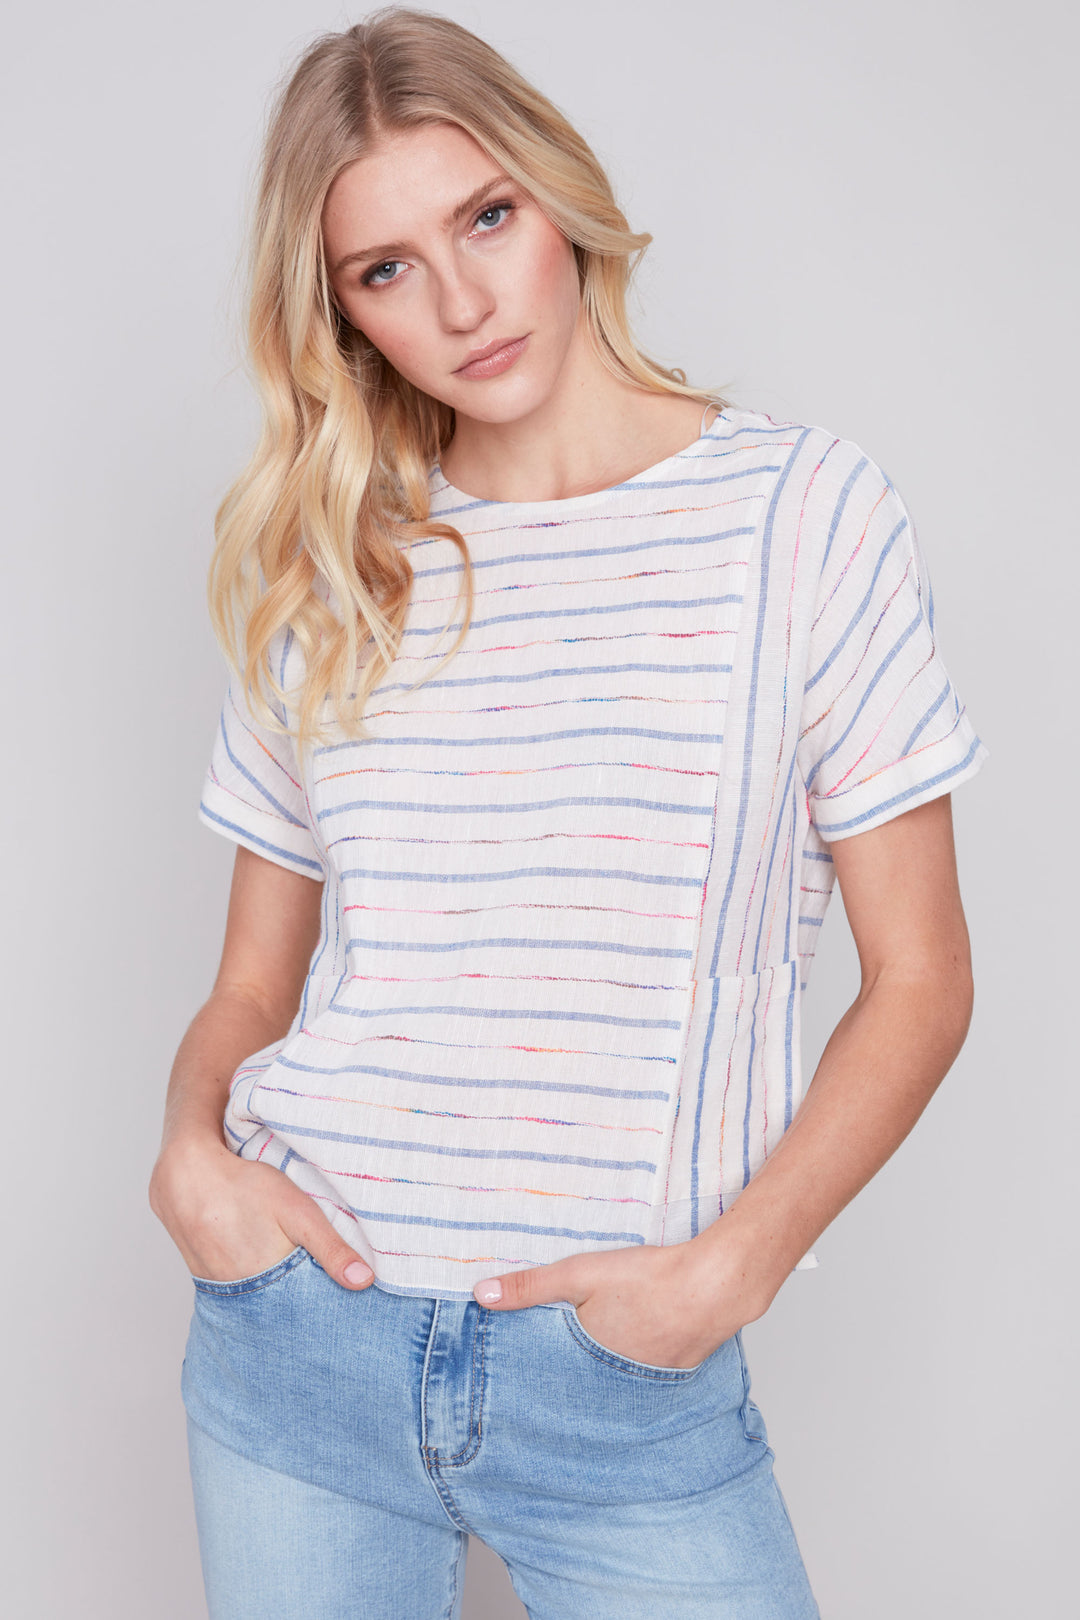 Made with a blend of light fabrics including cotton and linen, this yarn dye top offers a comfortable and breathable fit.